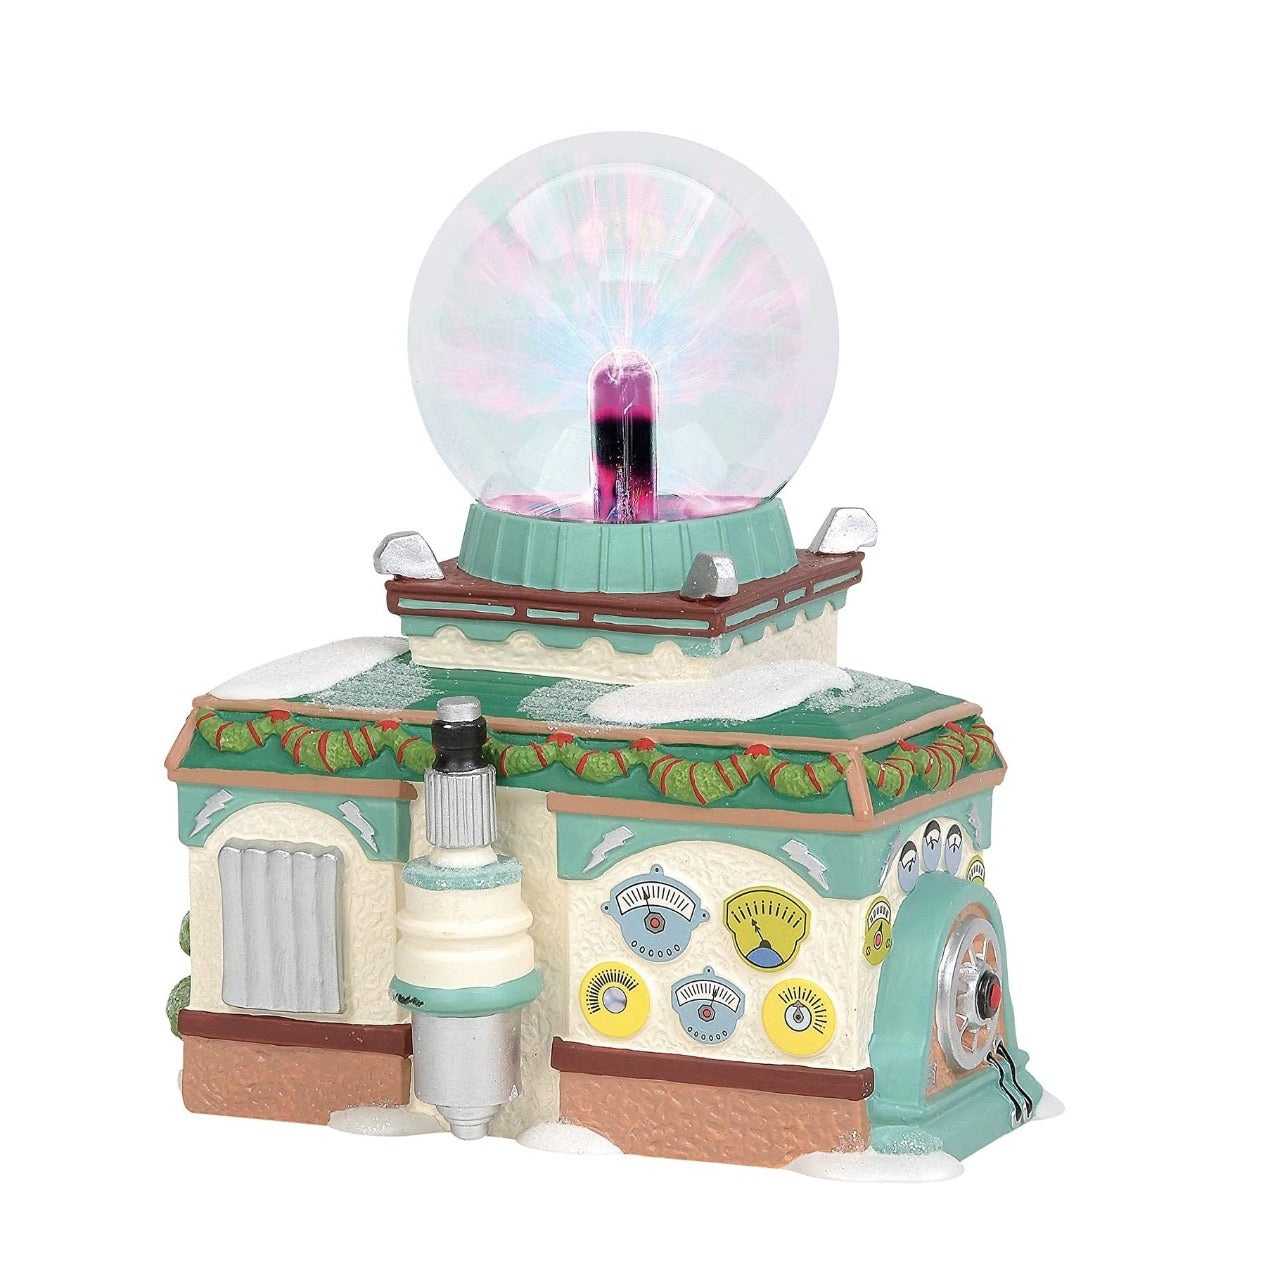 Running a toy workshop around the clock uses a lot of electricity. Thankfully for Santa, elf scientists have harnessed the power of the Northern Lights into a limitless source of clean energy. Features a plasma globe creating electric light effect. Includes 3-pin plug.